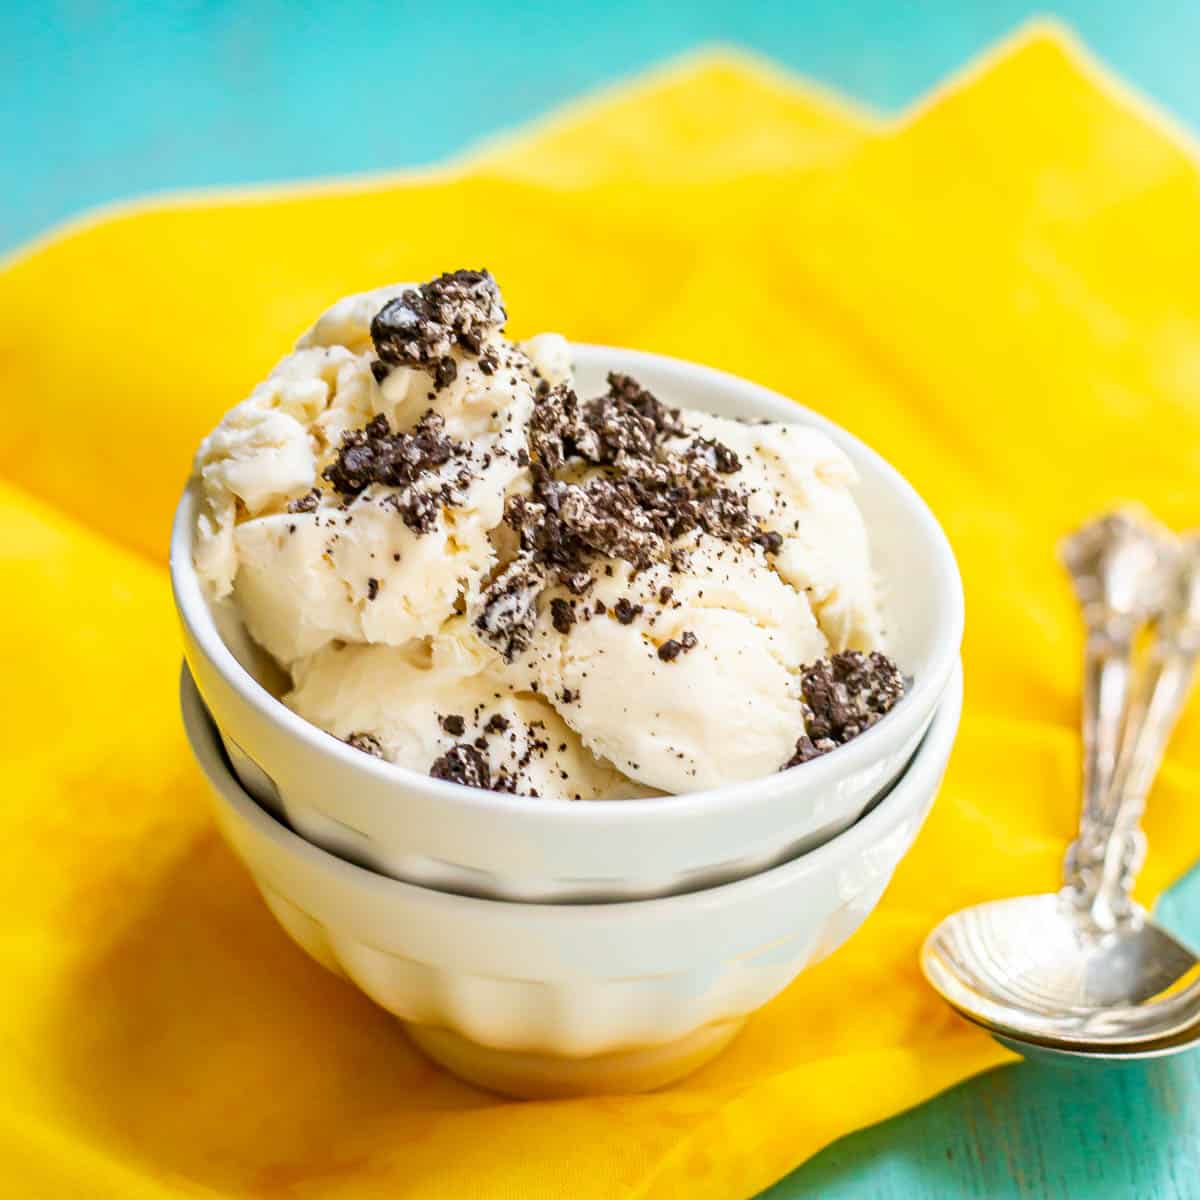 Close up of homemade vanilla no churn ice cream topped with crushed Oreo cookie pieces served in a stacked white bowl on a yellow fabric with spoons nearby.